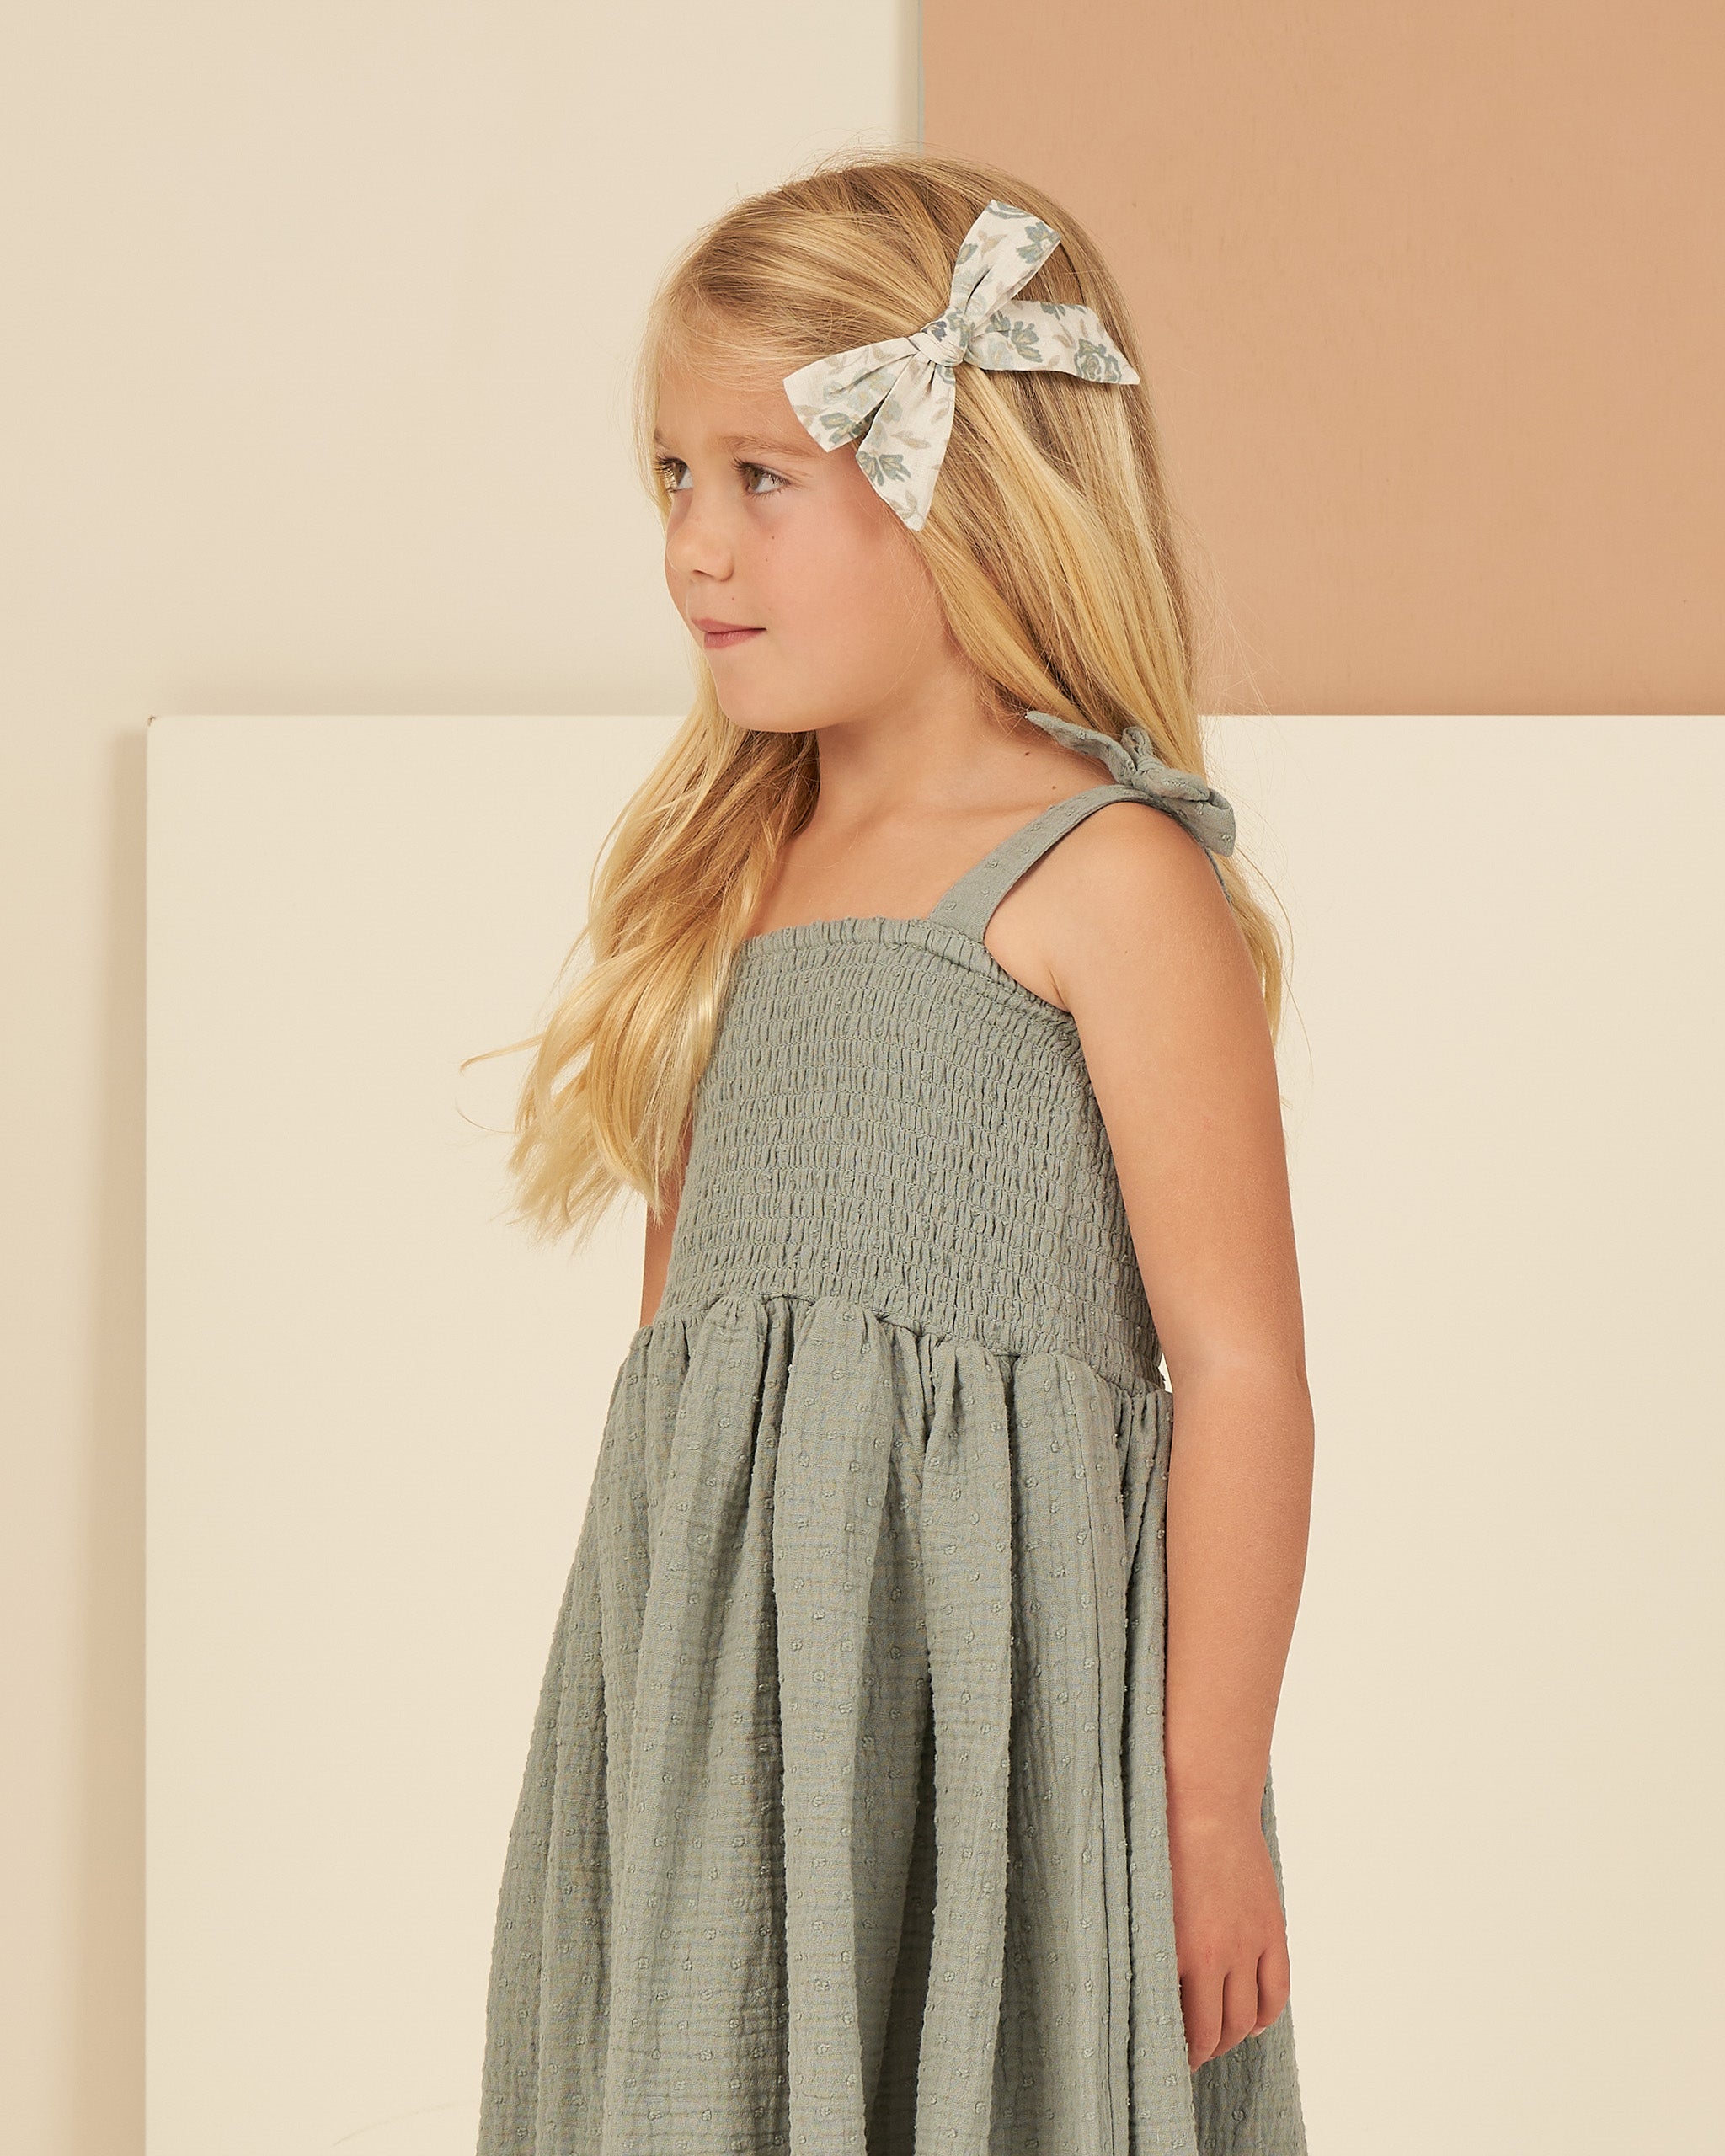 Ivy Dress || Aqua - Rylee + Cru | Kids Clothes | Trendy Baby Clothes | Modern Infant Outfits |